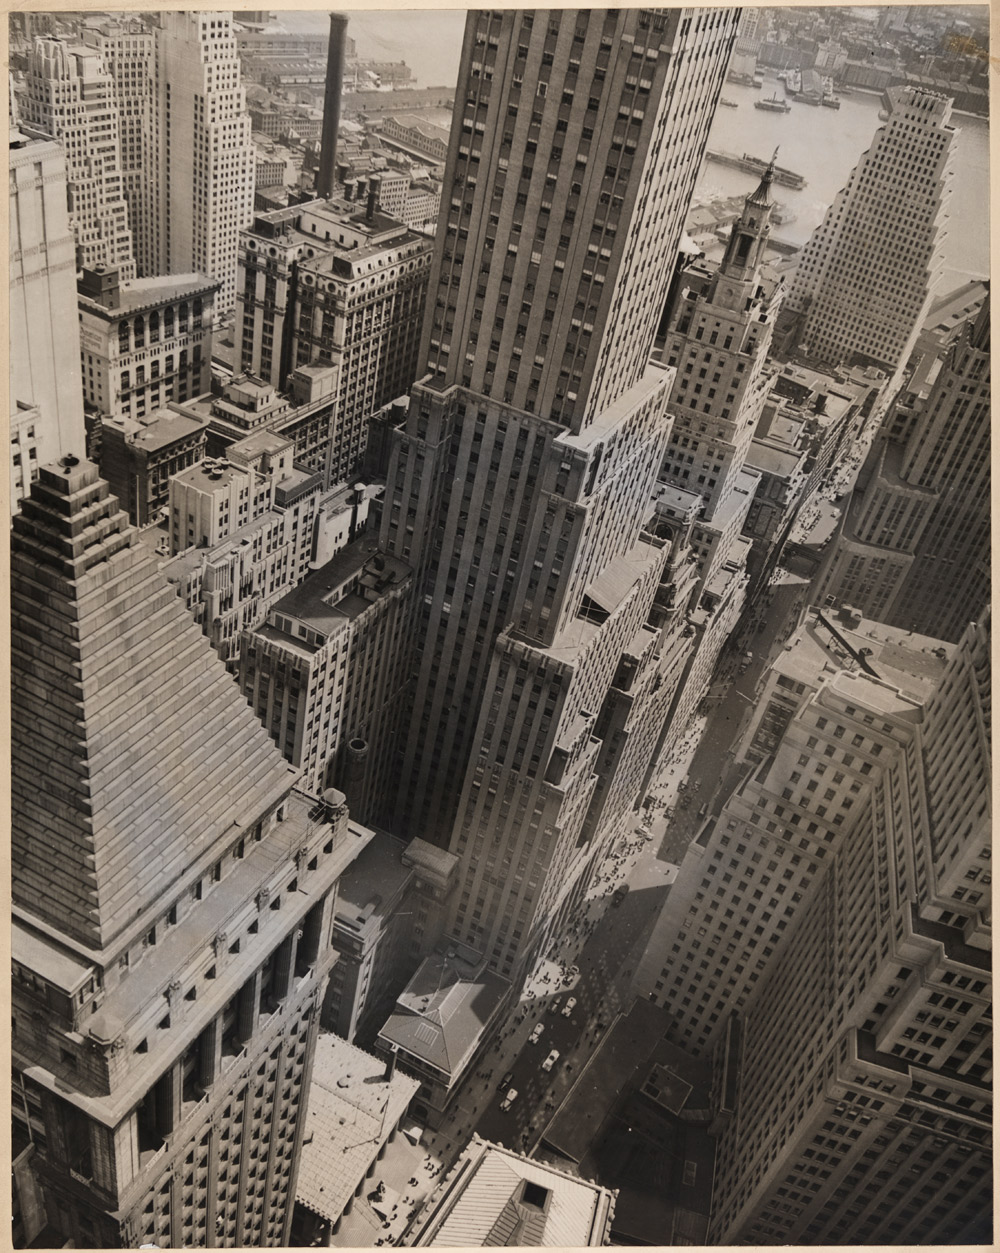 Berenice Abbott photograph of Wall Street Showing East River, May 4, 1938